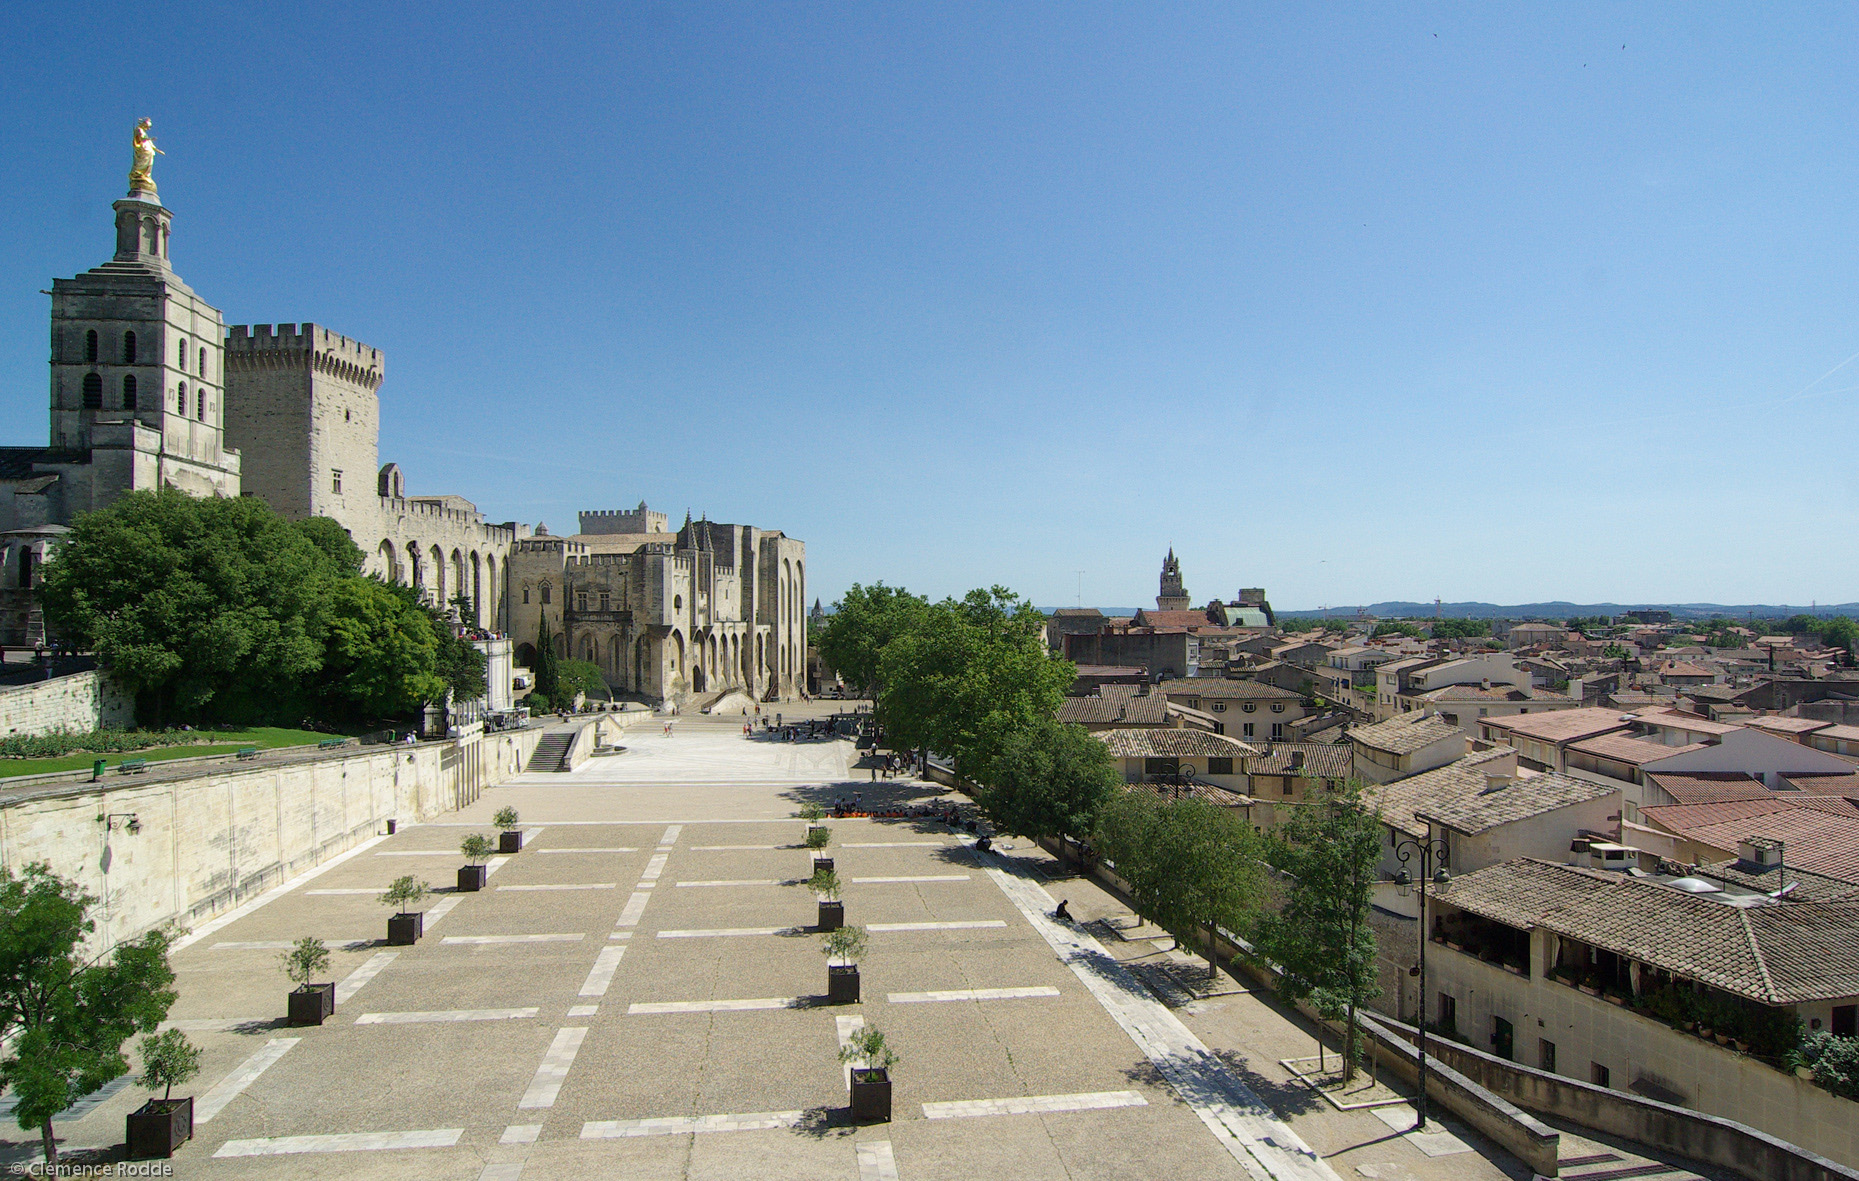 Avignon city center - Palace of the popes